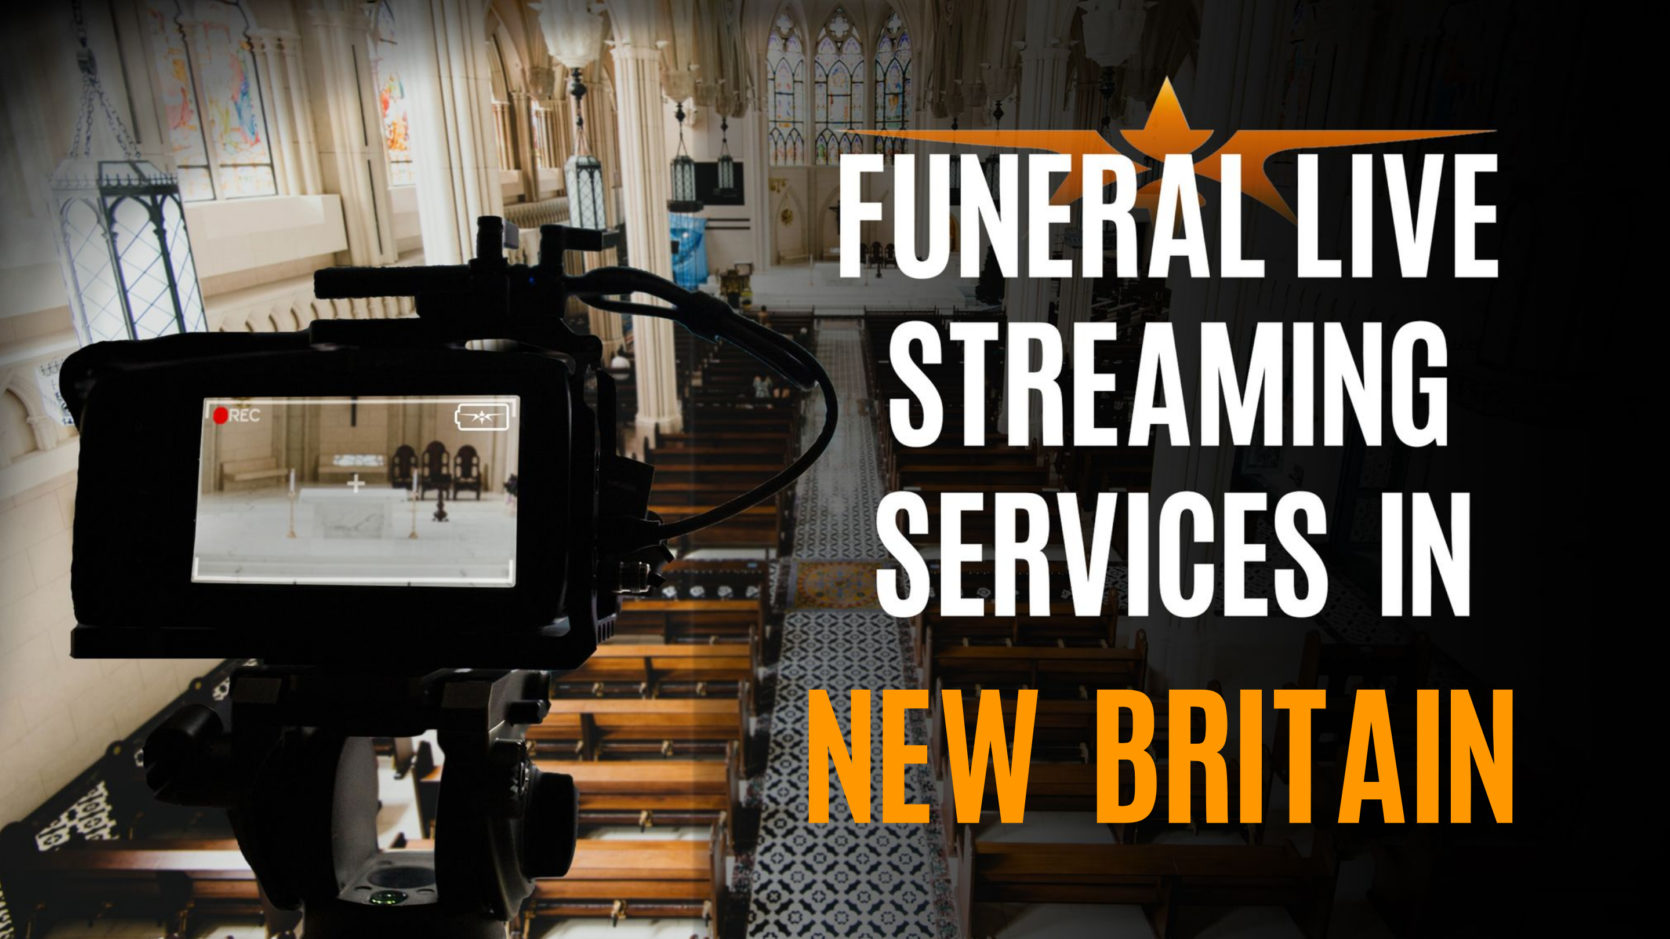 Funeral Live Streaming Services in New Britain